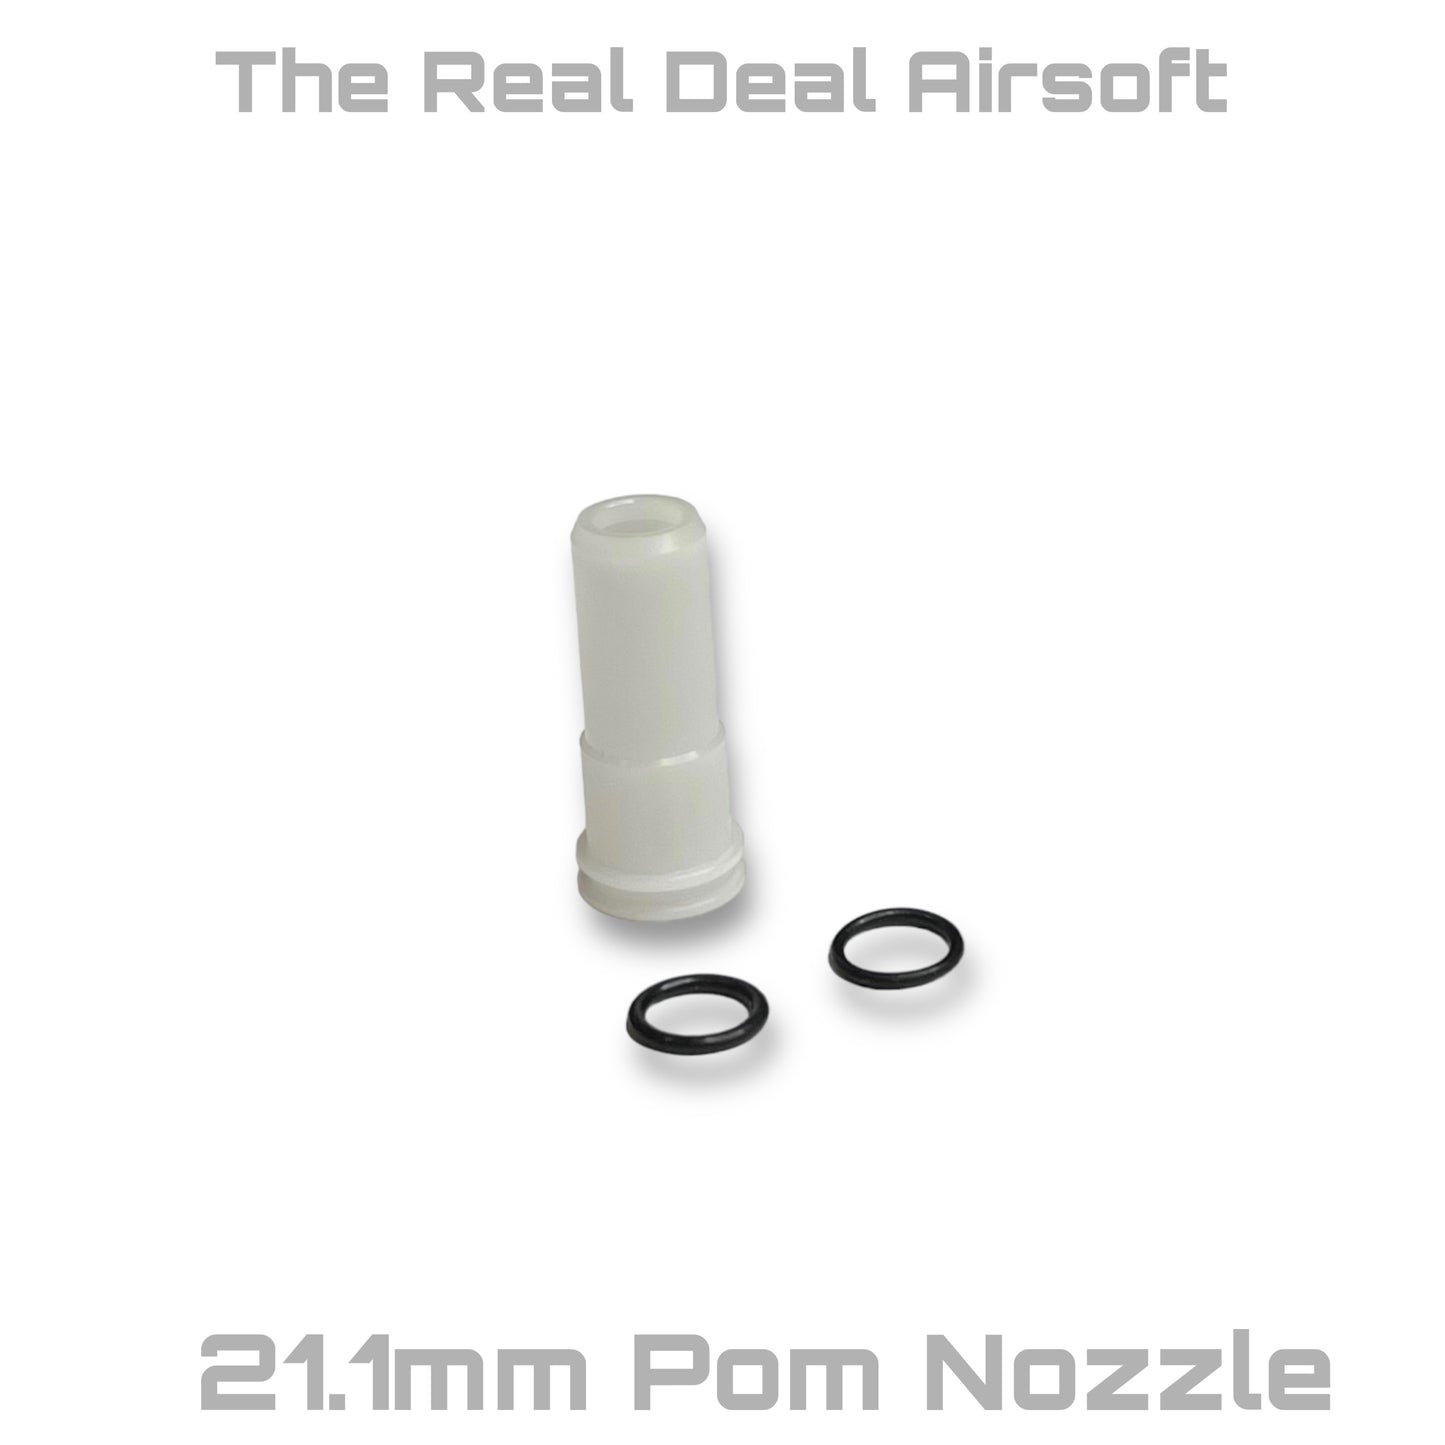 Real Deal 21.1 POM Nozzle